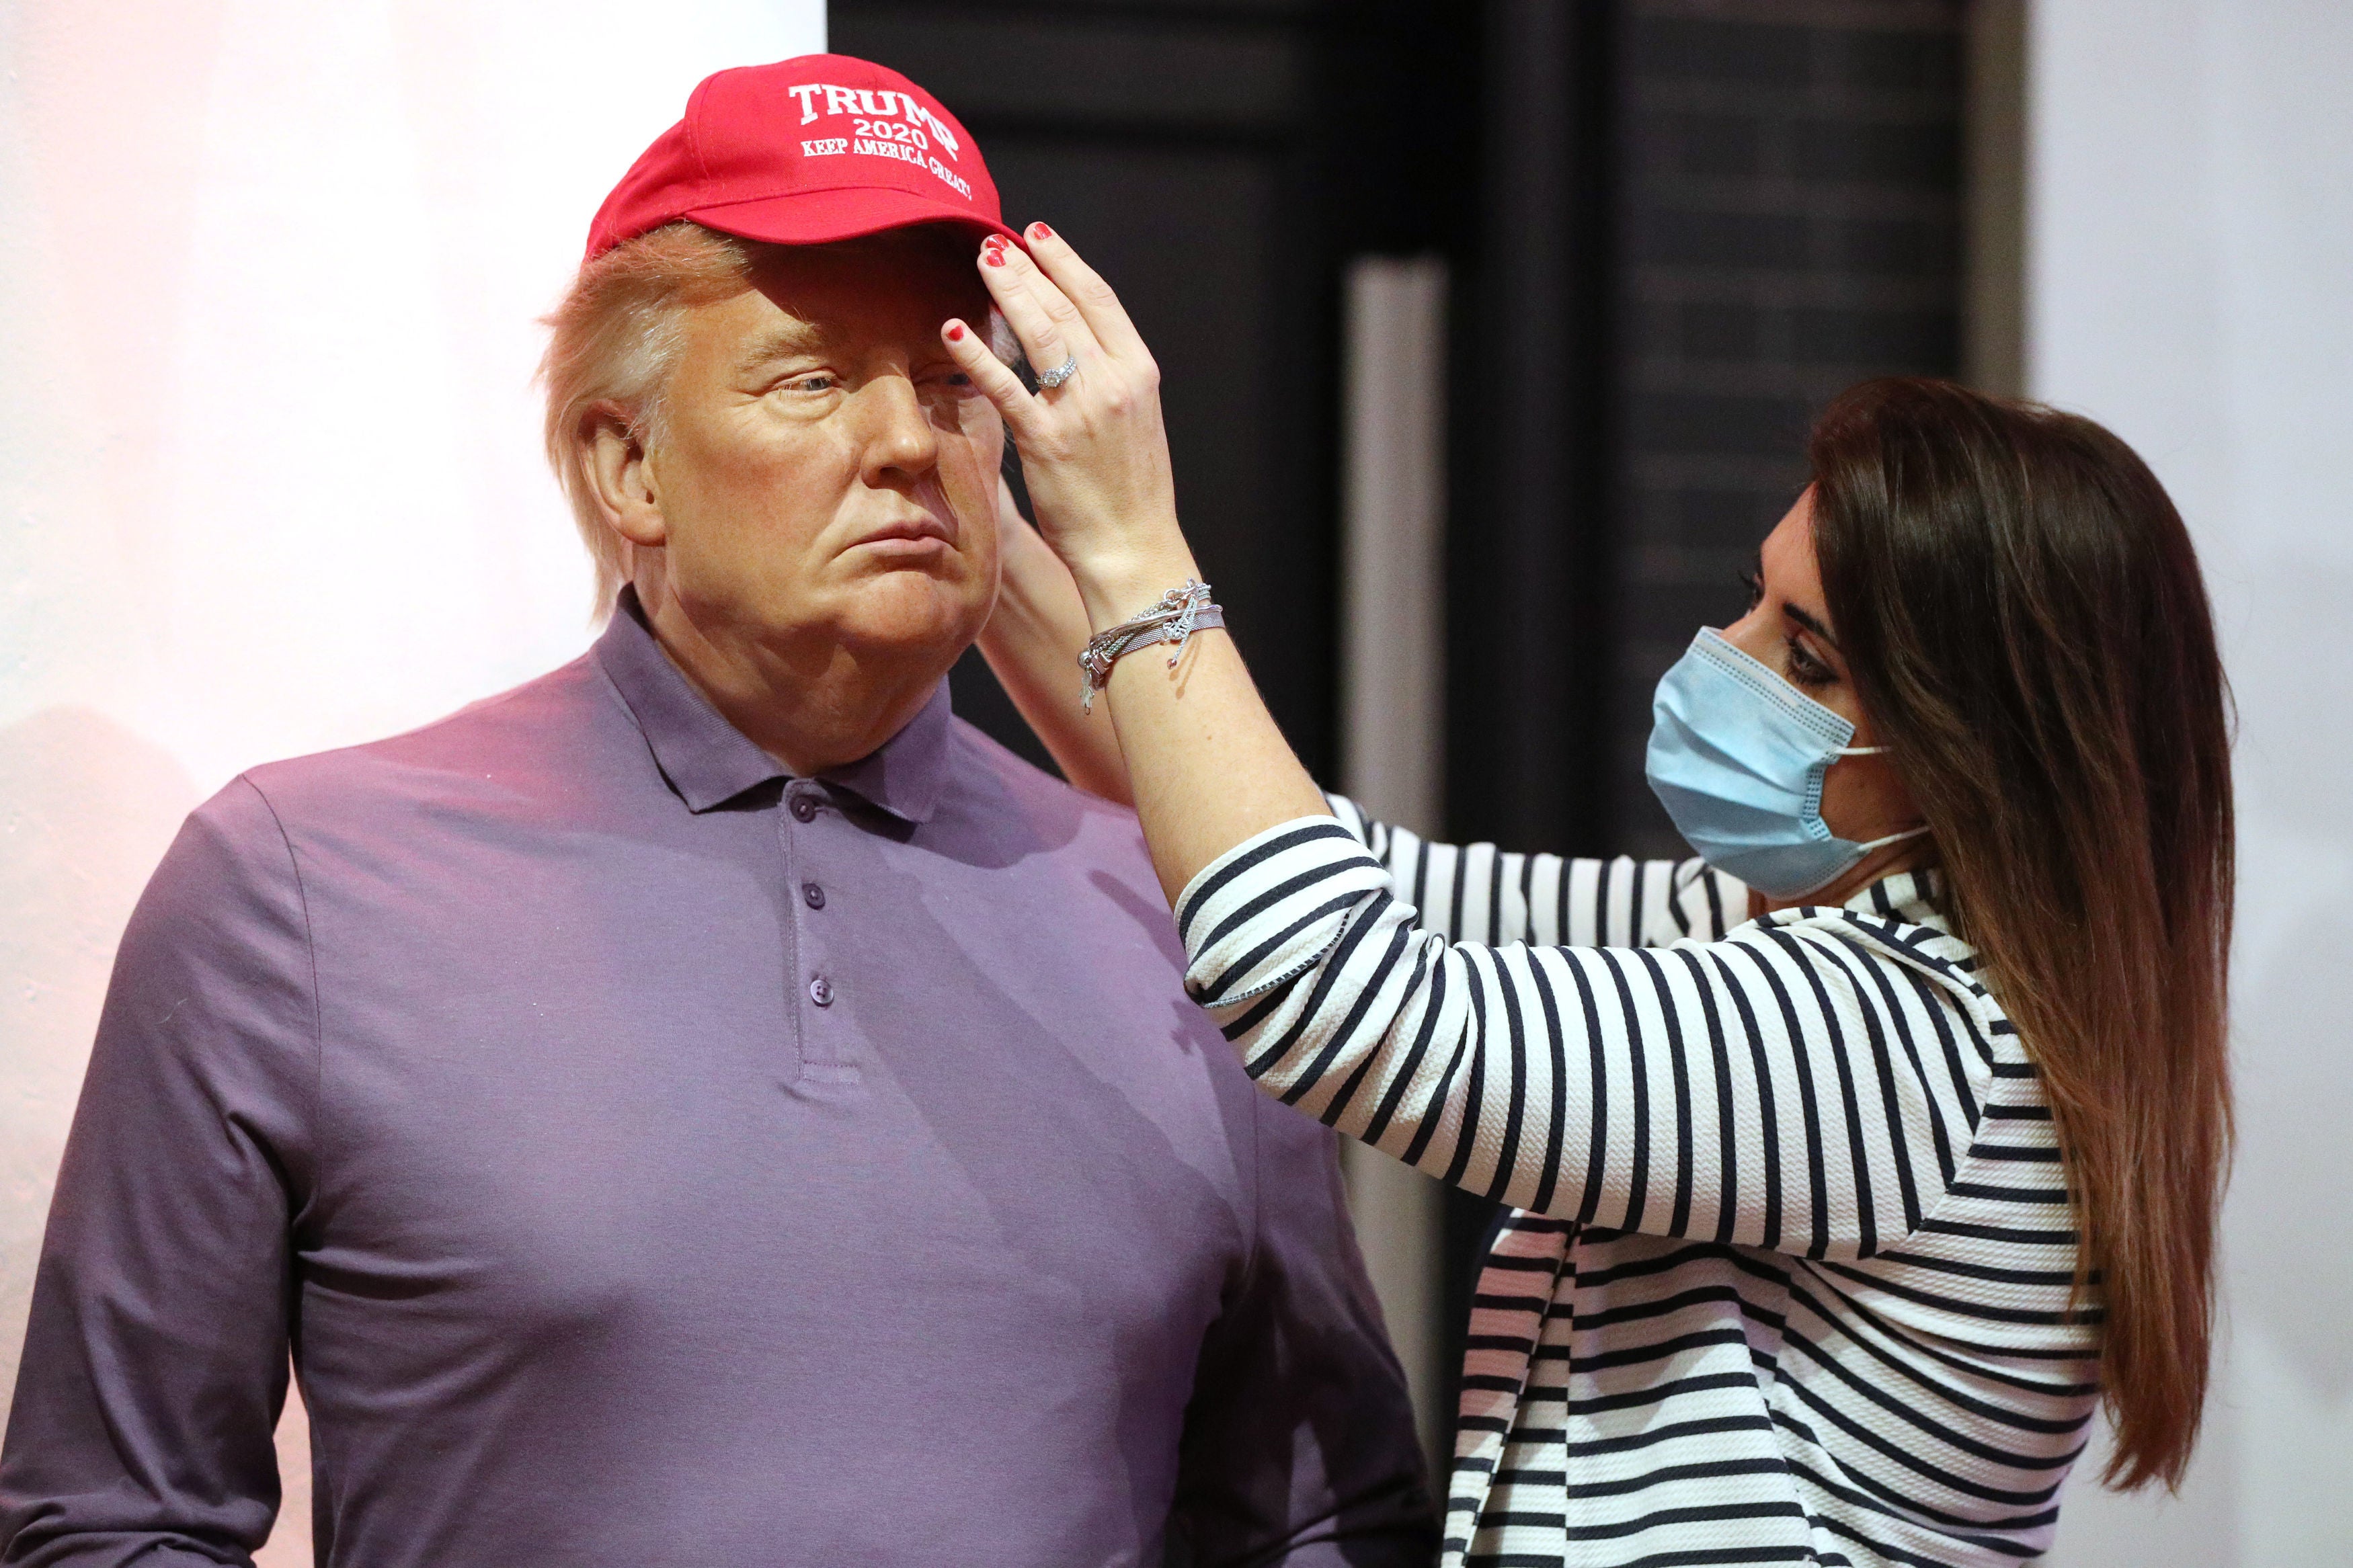 A member of the Madame Tussauds studios team adjusts a wax figure of Donald Trump which has been re-dressed in golf wear following the 2020 US presidential election